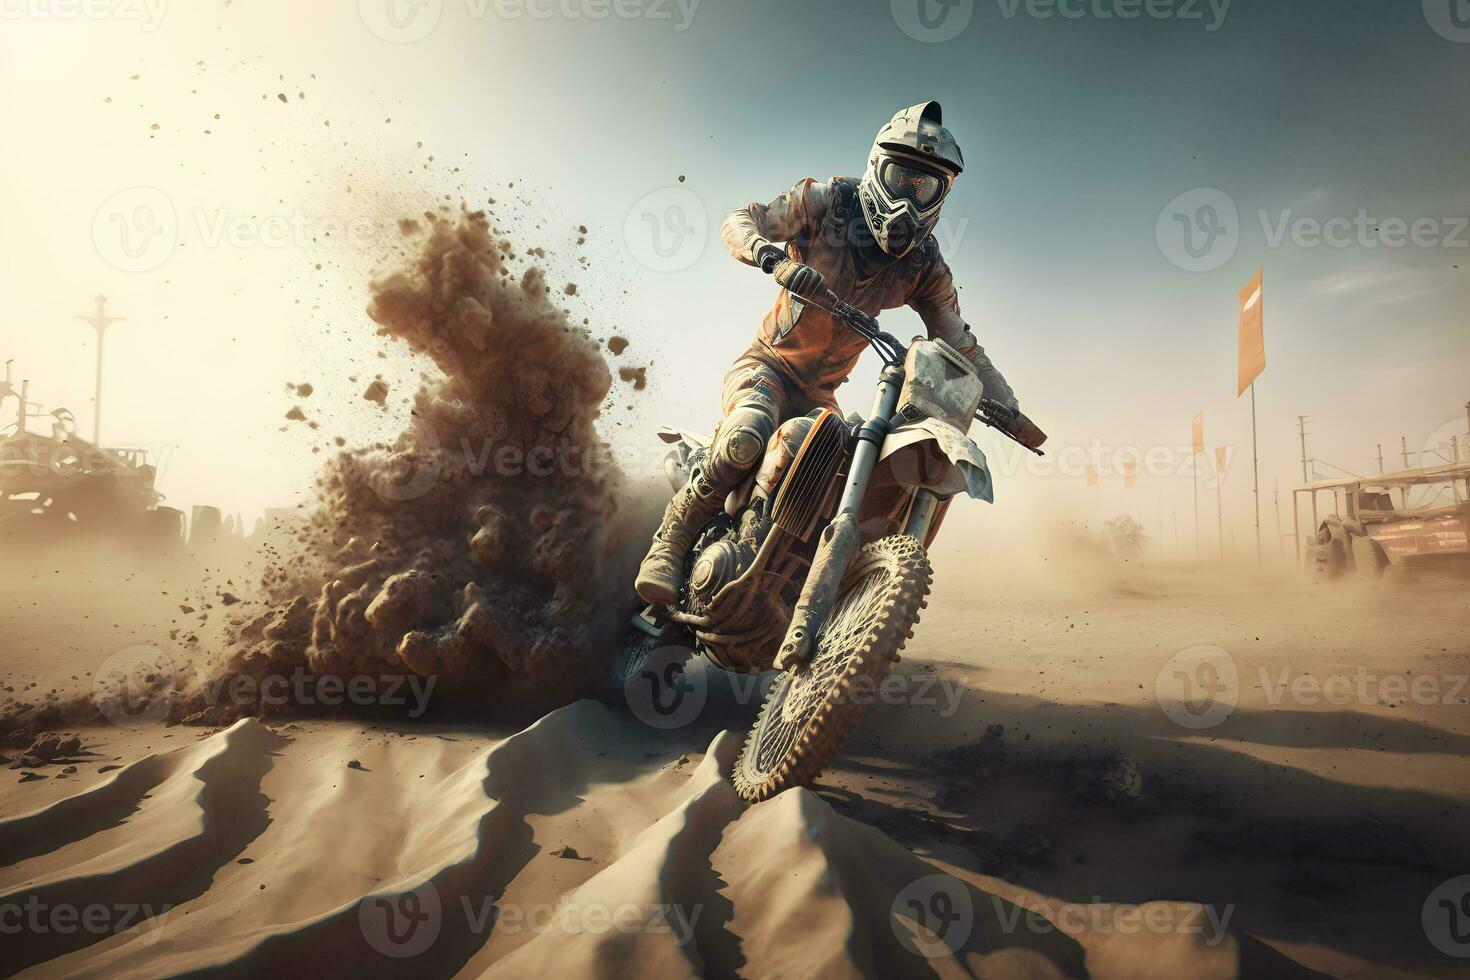 Rider on a ktm bike in the desert. Neural network AI generated photo